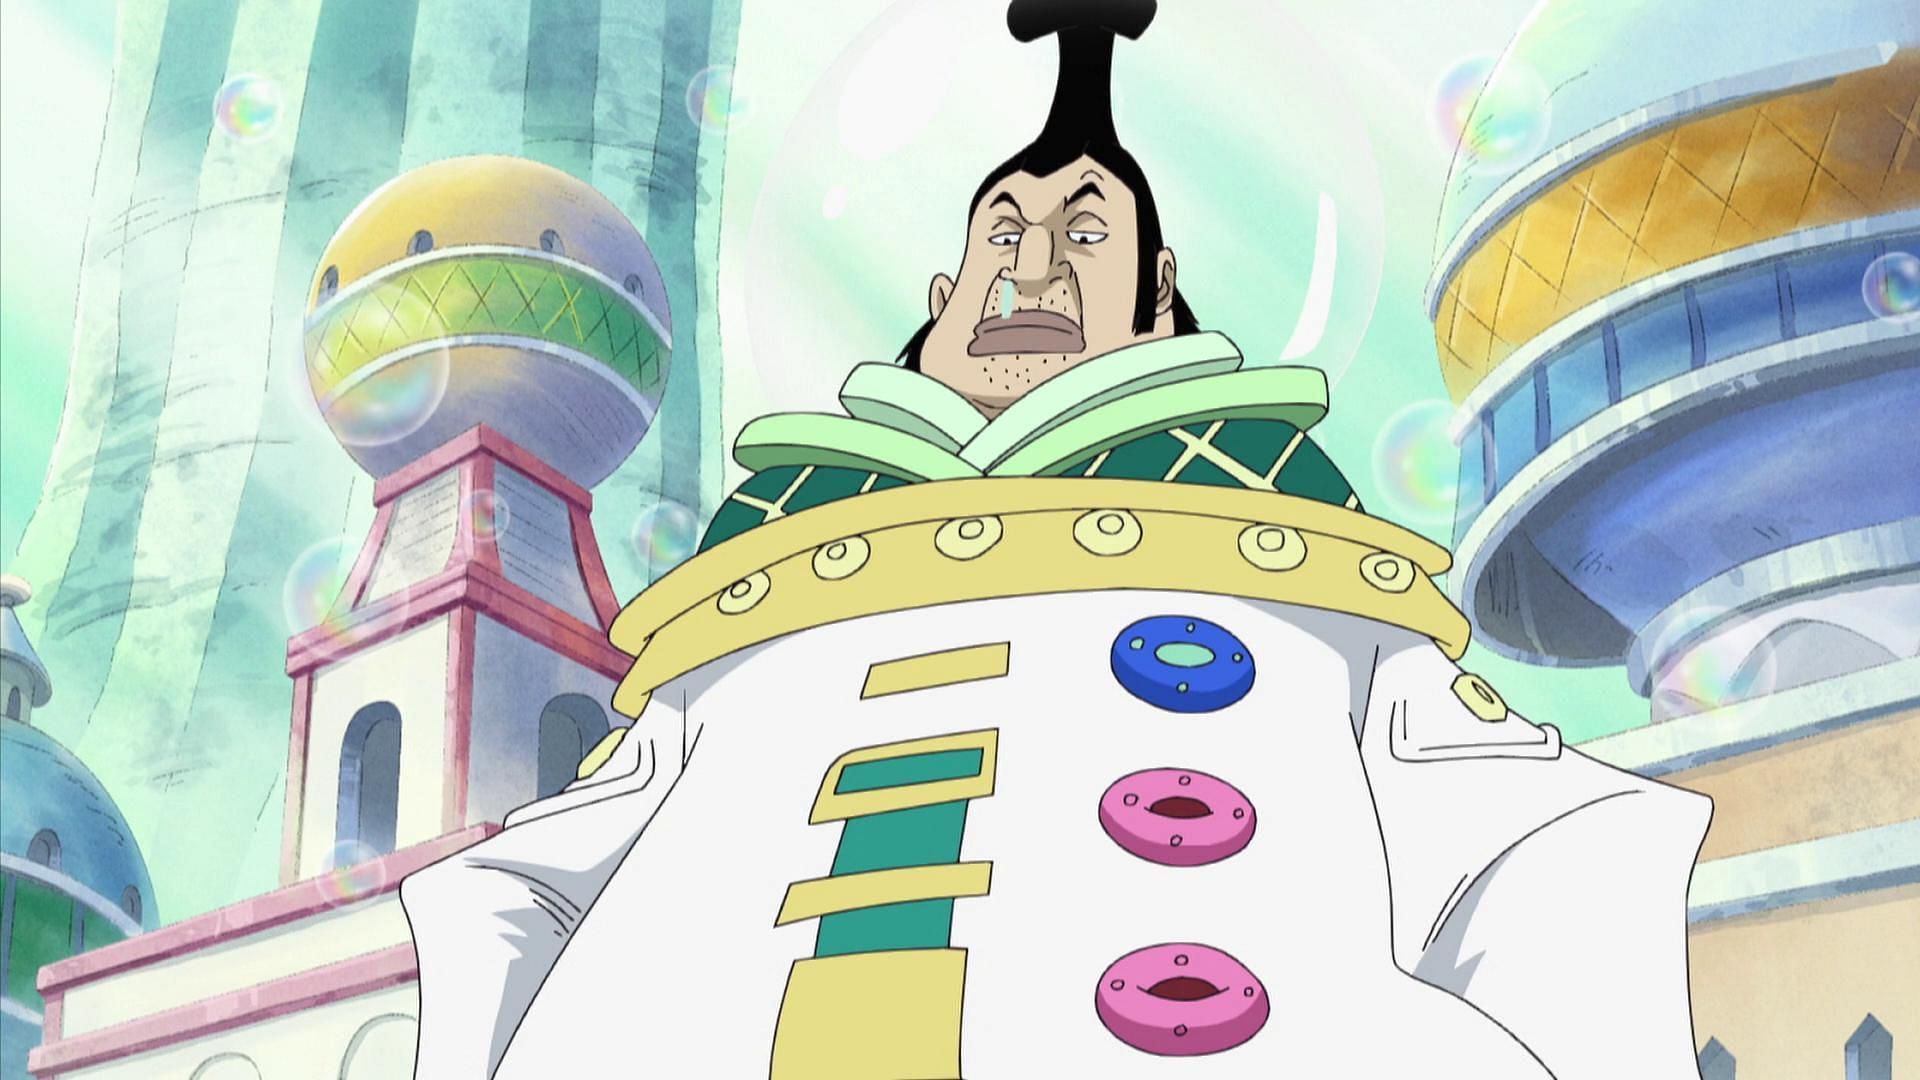 Saint Charlos as seen in One Piece (Image via Toei Animation, One Piece)